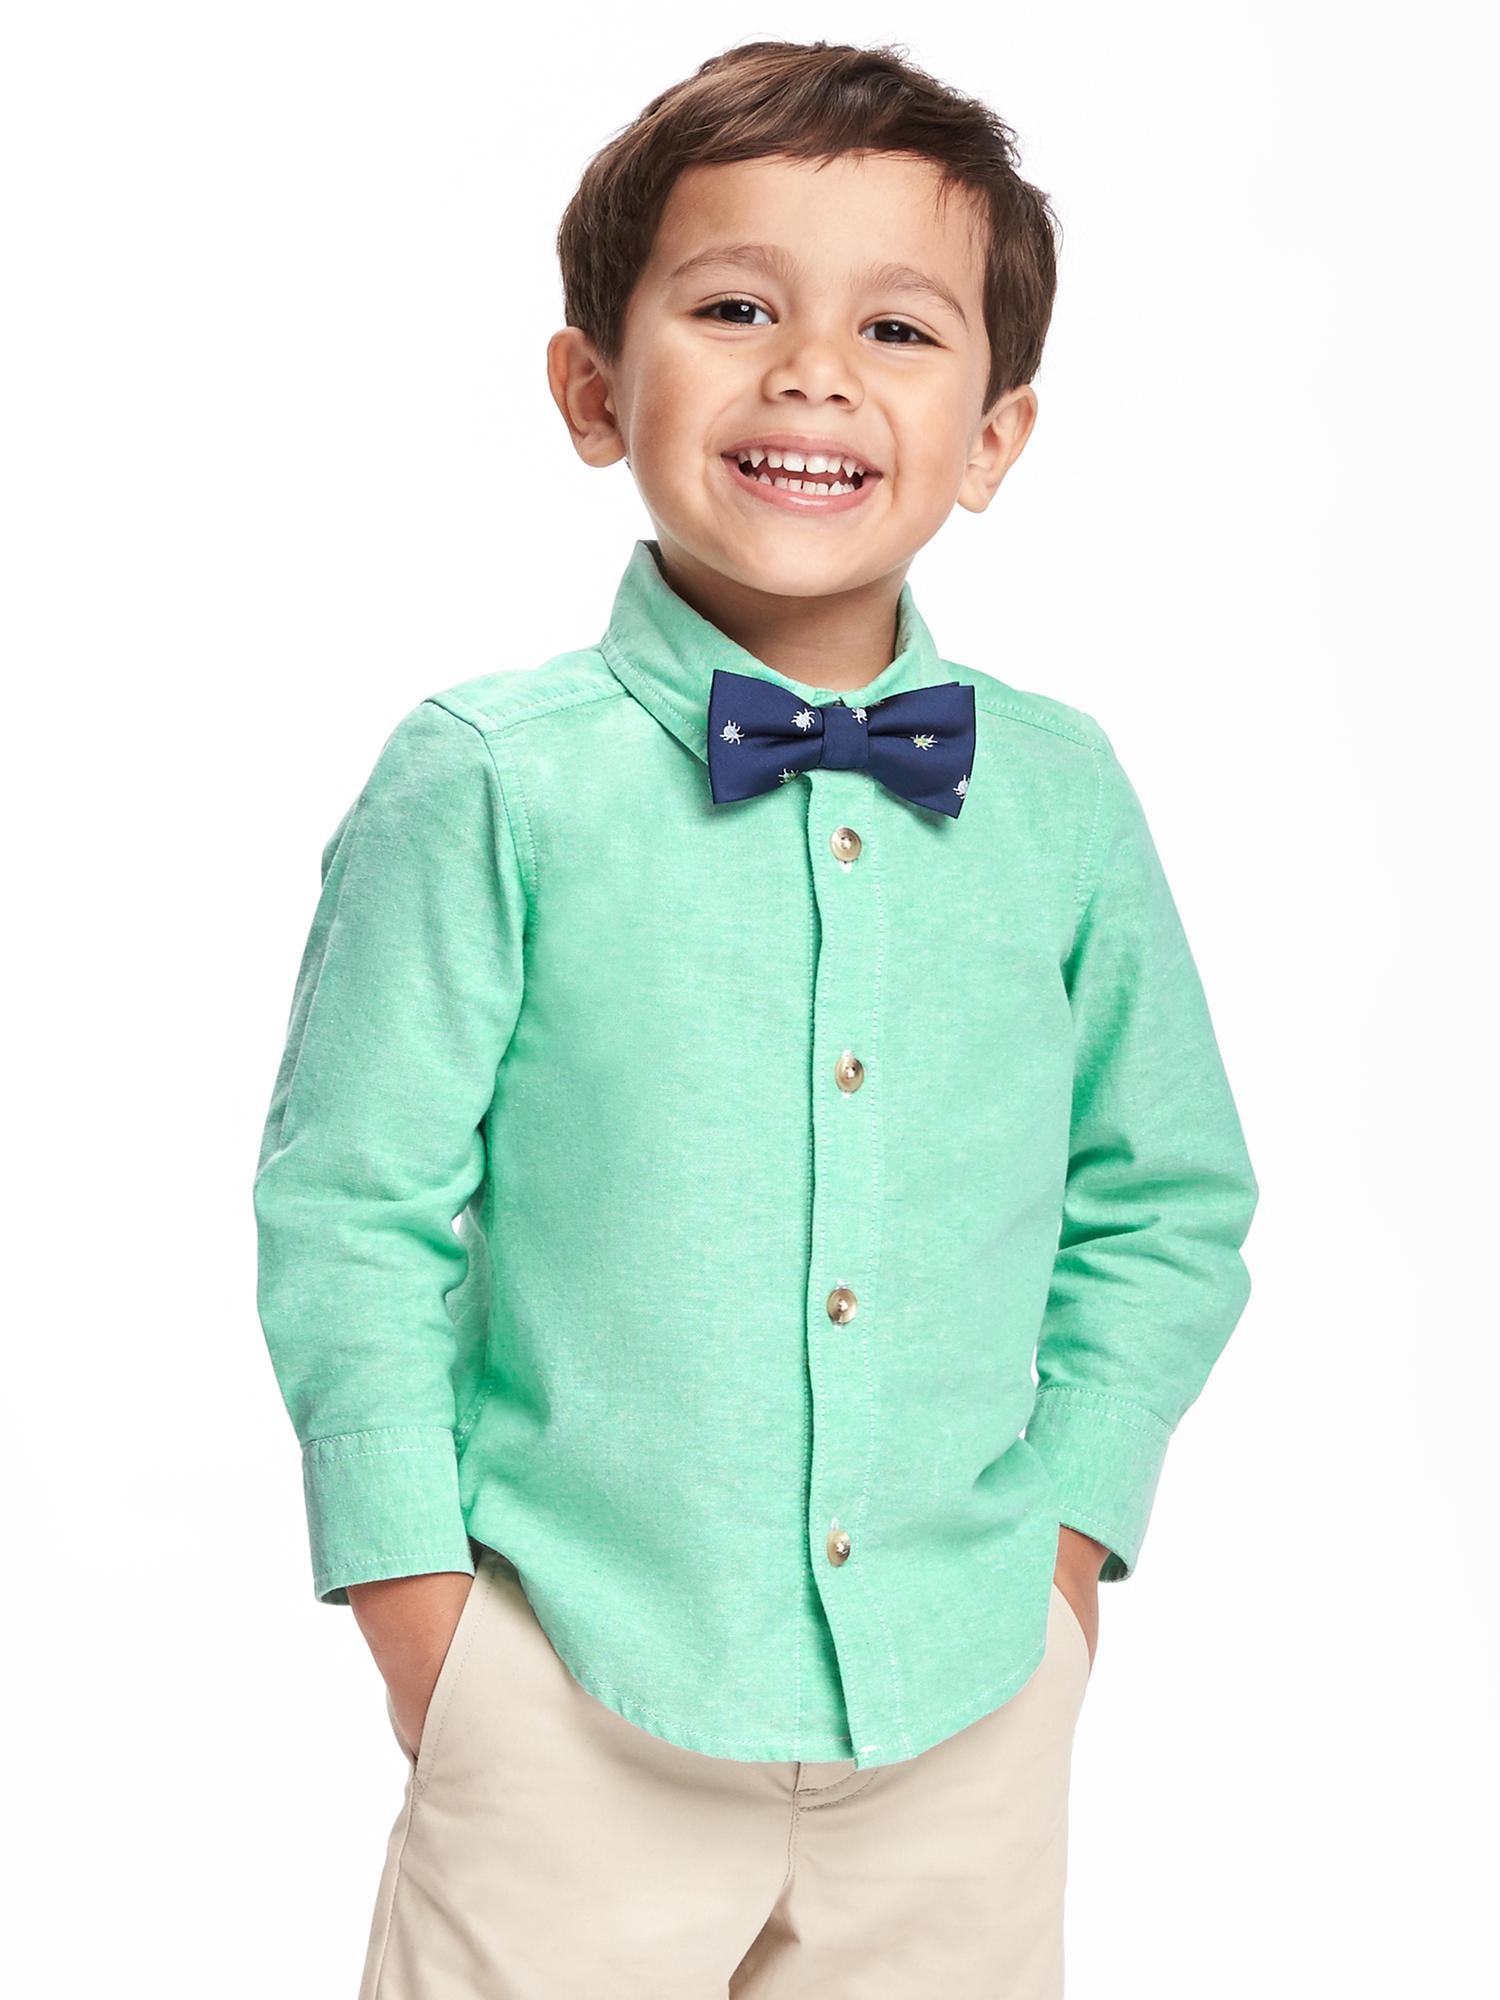 Oxford Shirt & Bow-Tie Set for Toddler Boys | Old Navy